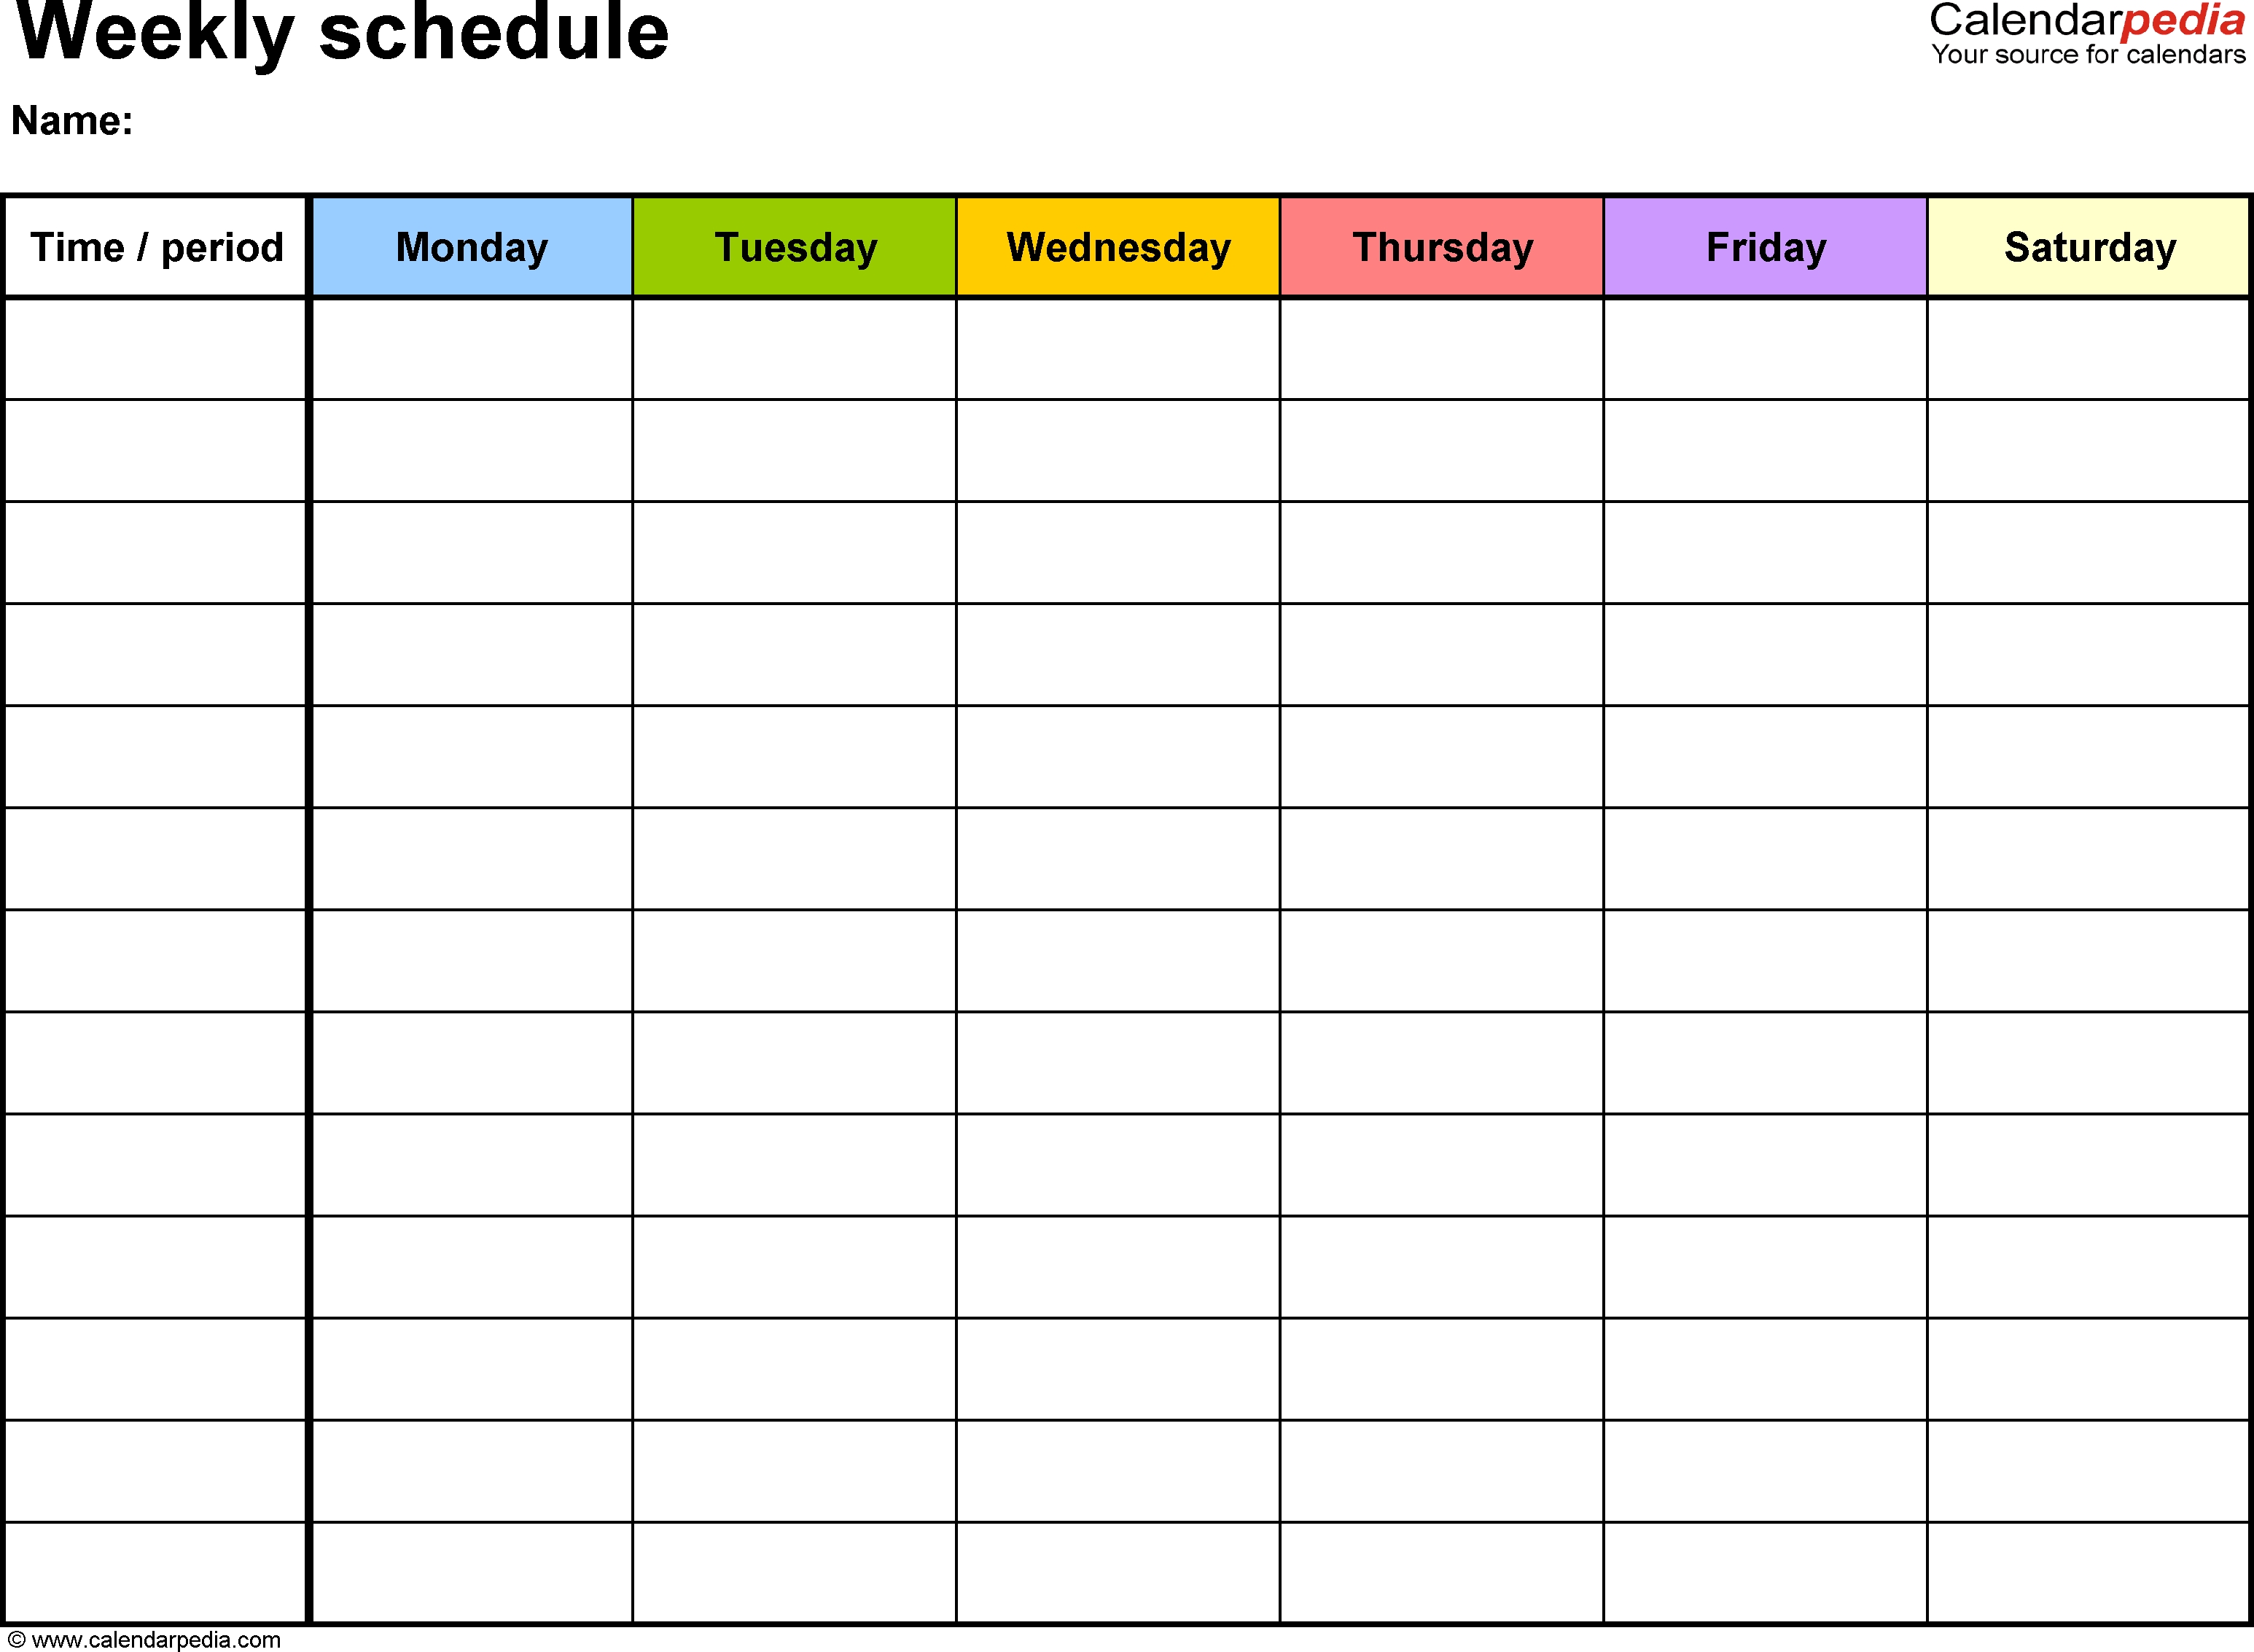 Free Weekly Schedule Templates For Word - 18 Templates-Monday Through Friday Template